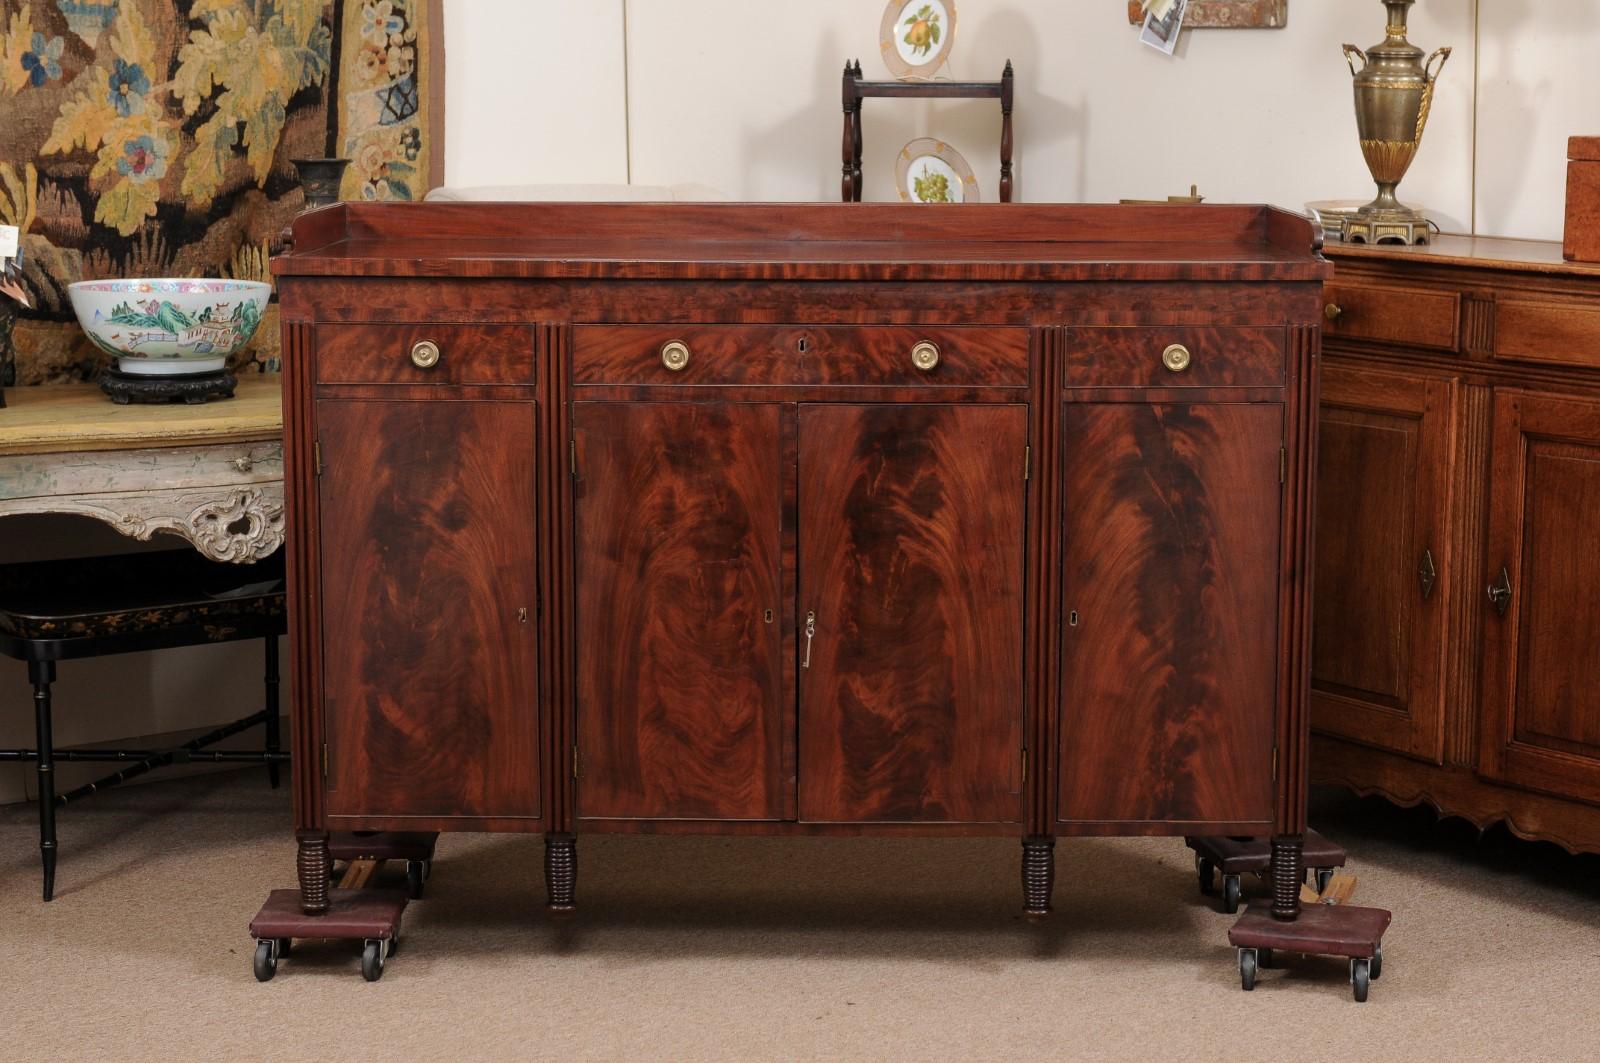 19th Century American Sheraton Sideboard in Mahogany with 4 Cabinet Doors 8